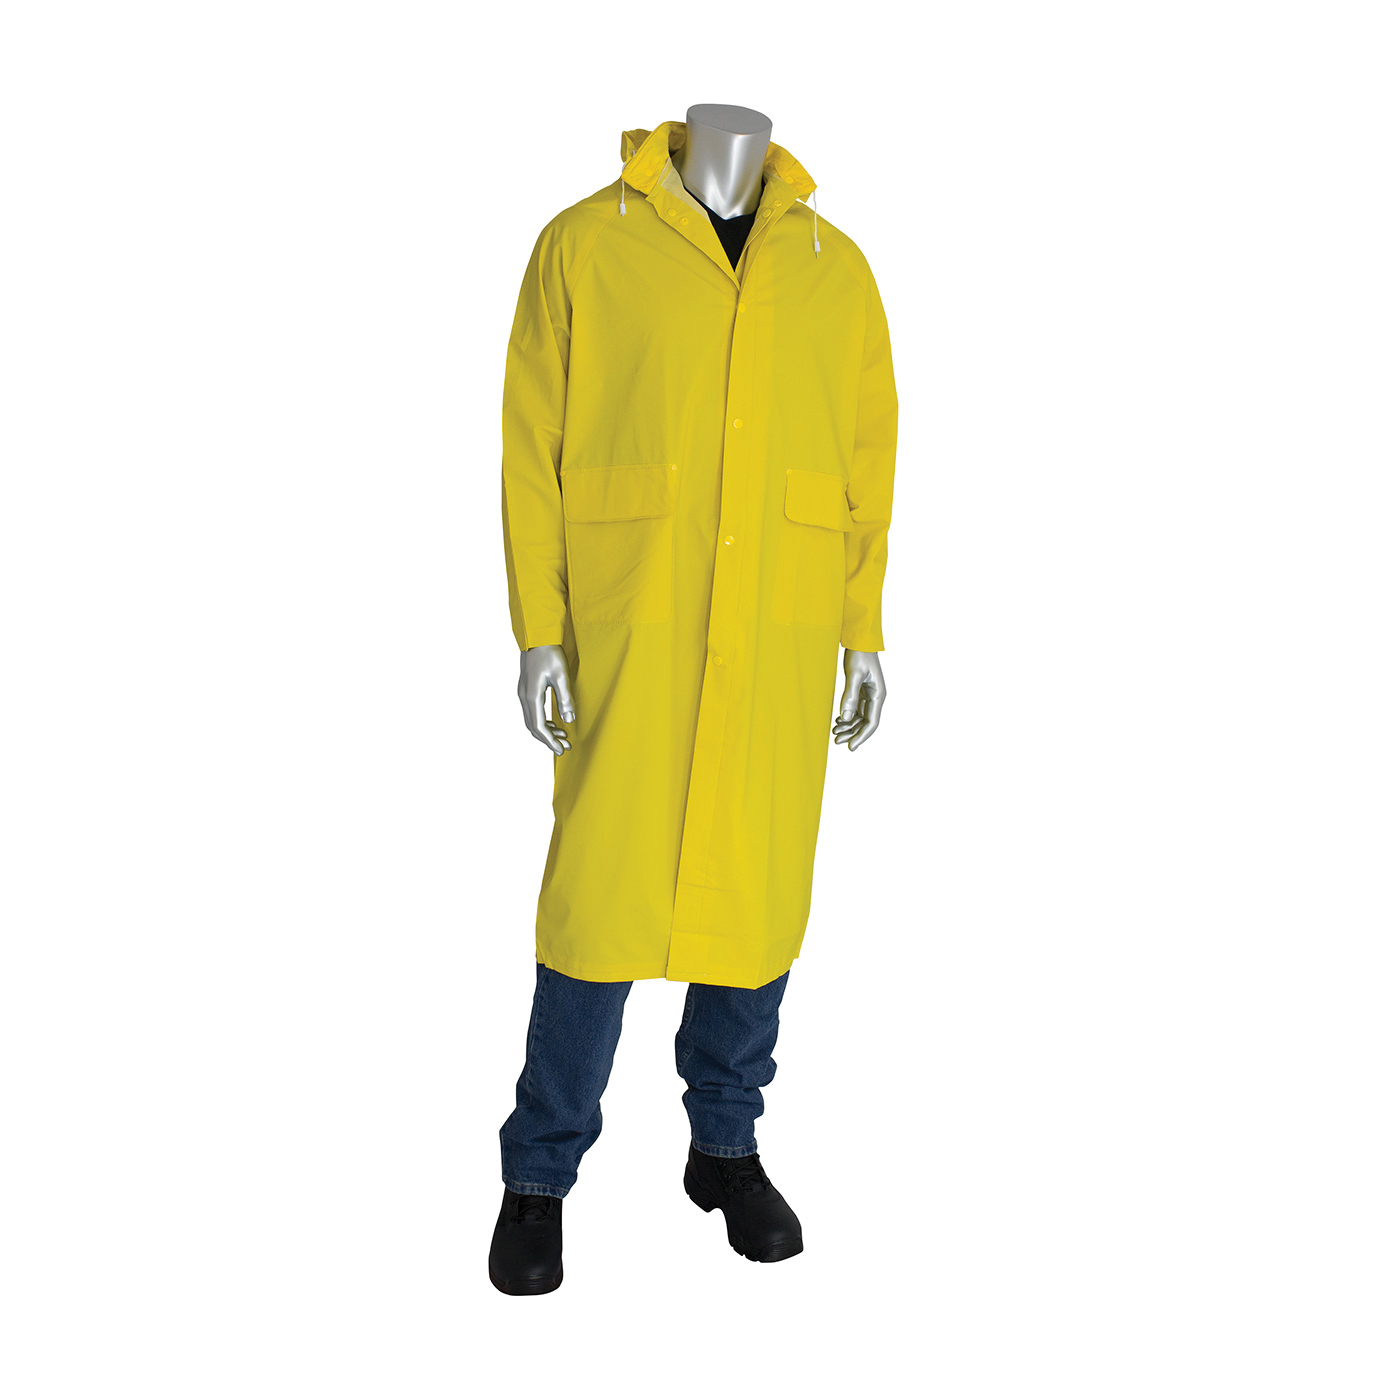 PIP® FALCON™ Base35FR™ 205-300FR/M 2-Piece Premium Rain Coat, Unisex, M, Yellow, Corduroy/Polyester/PVC, Resists: Flame and Water, Specifications Met: ASTM D6413